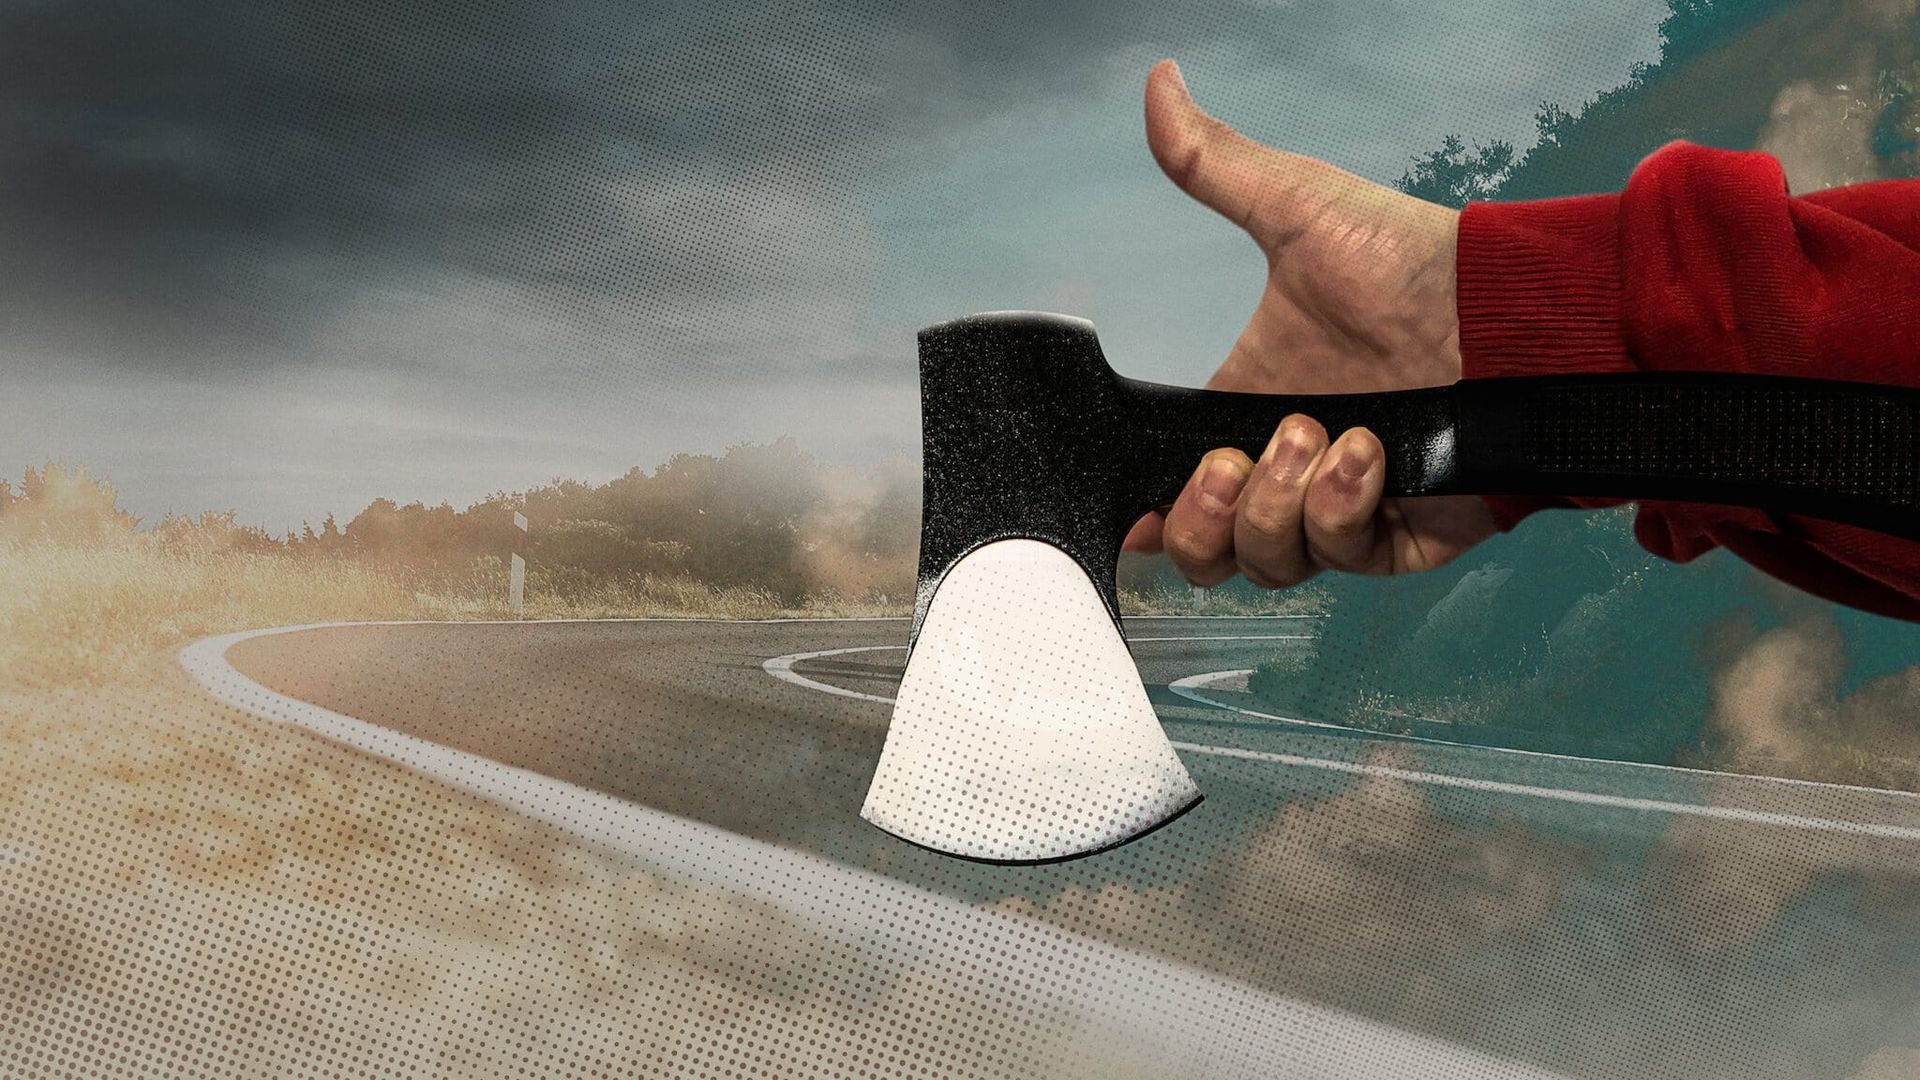 The Hatchet Wielding Hitchhiker background